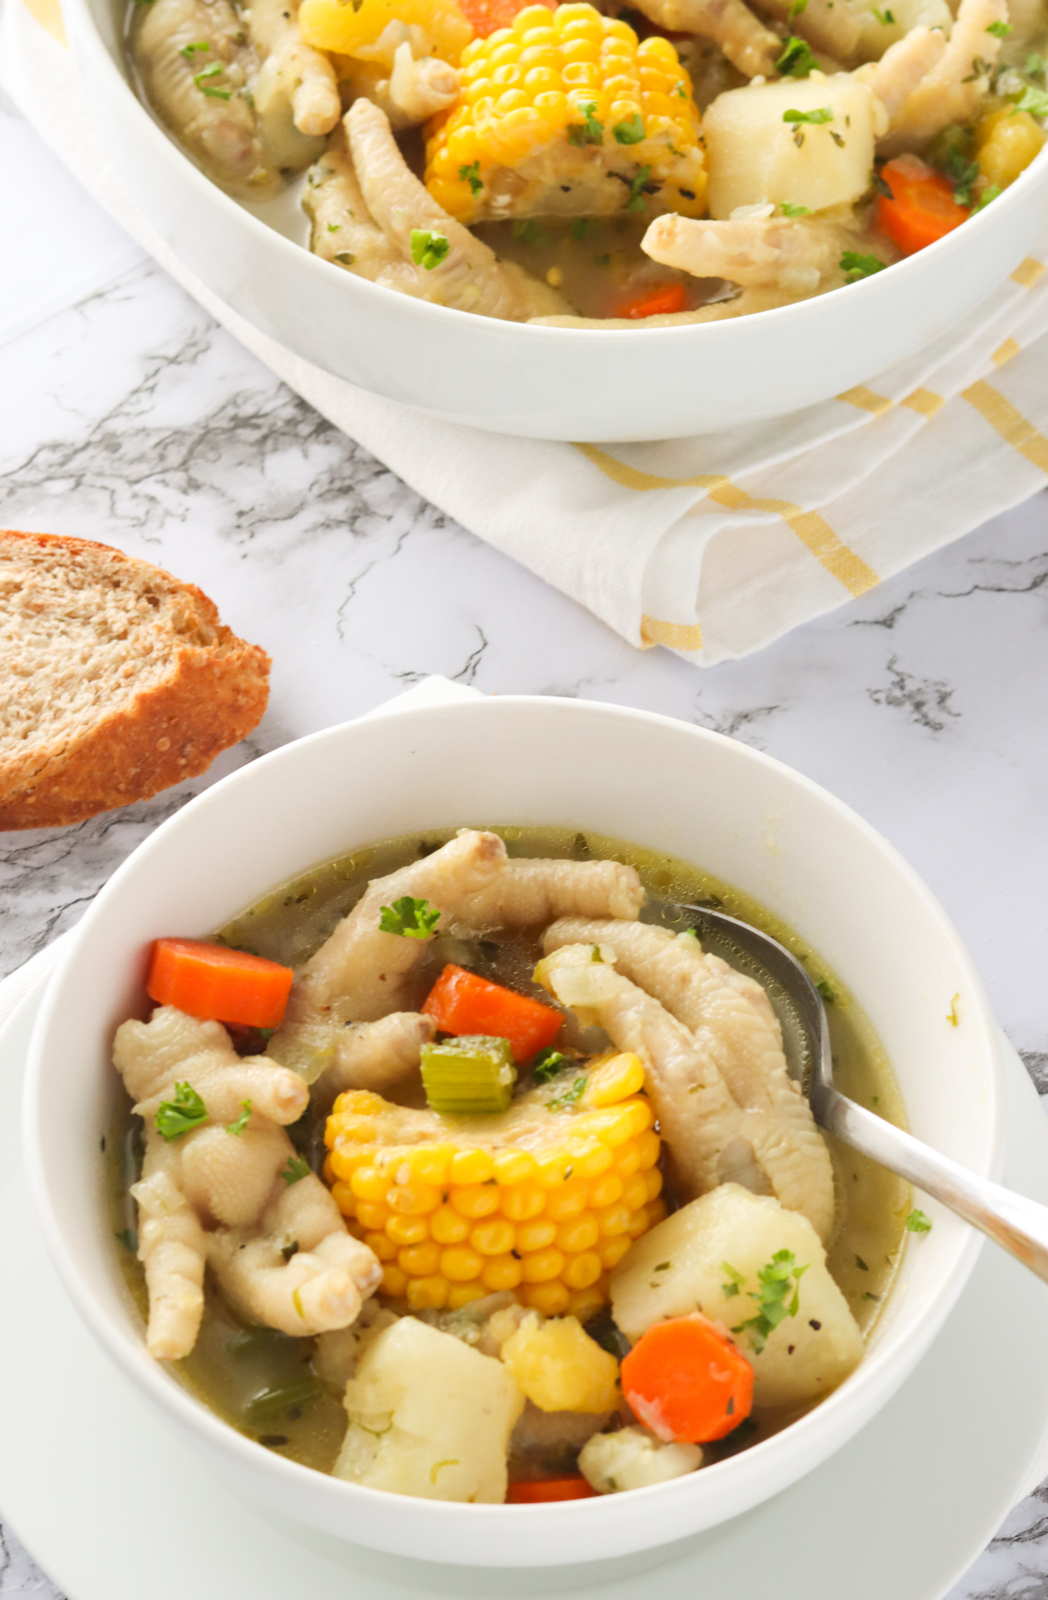 Two bowls of chicken feet soup with homemade bread